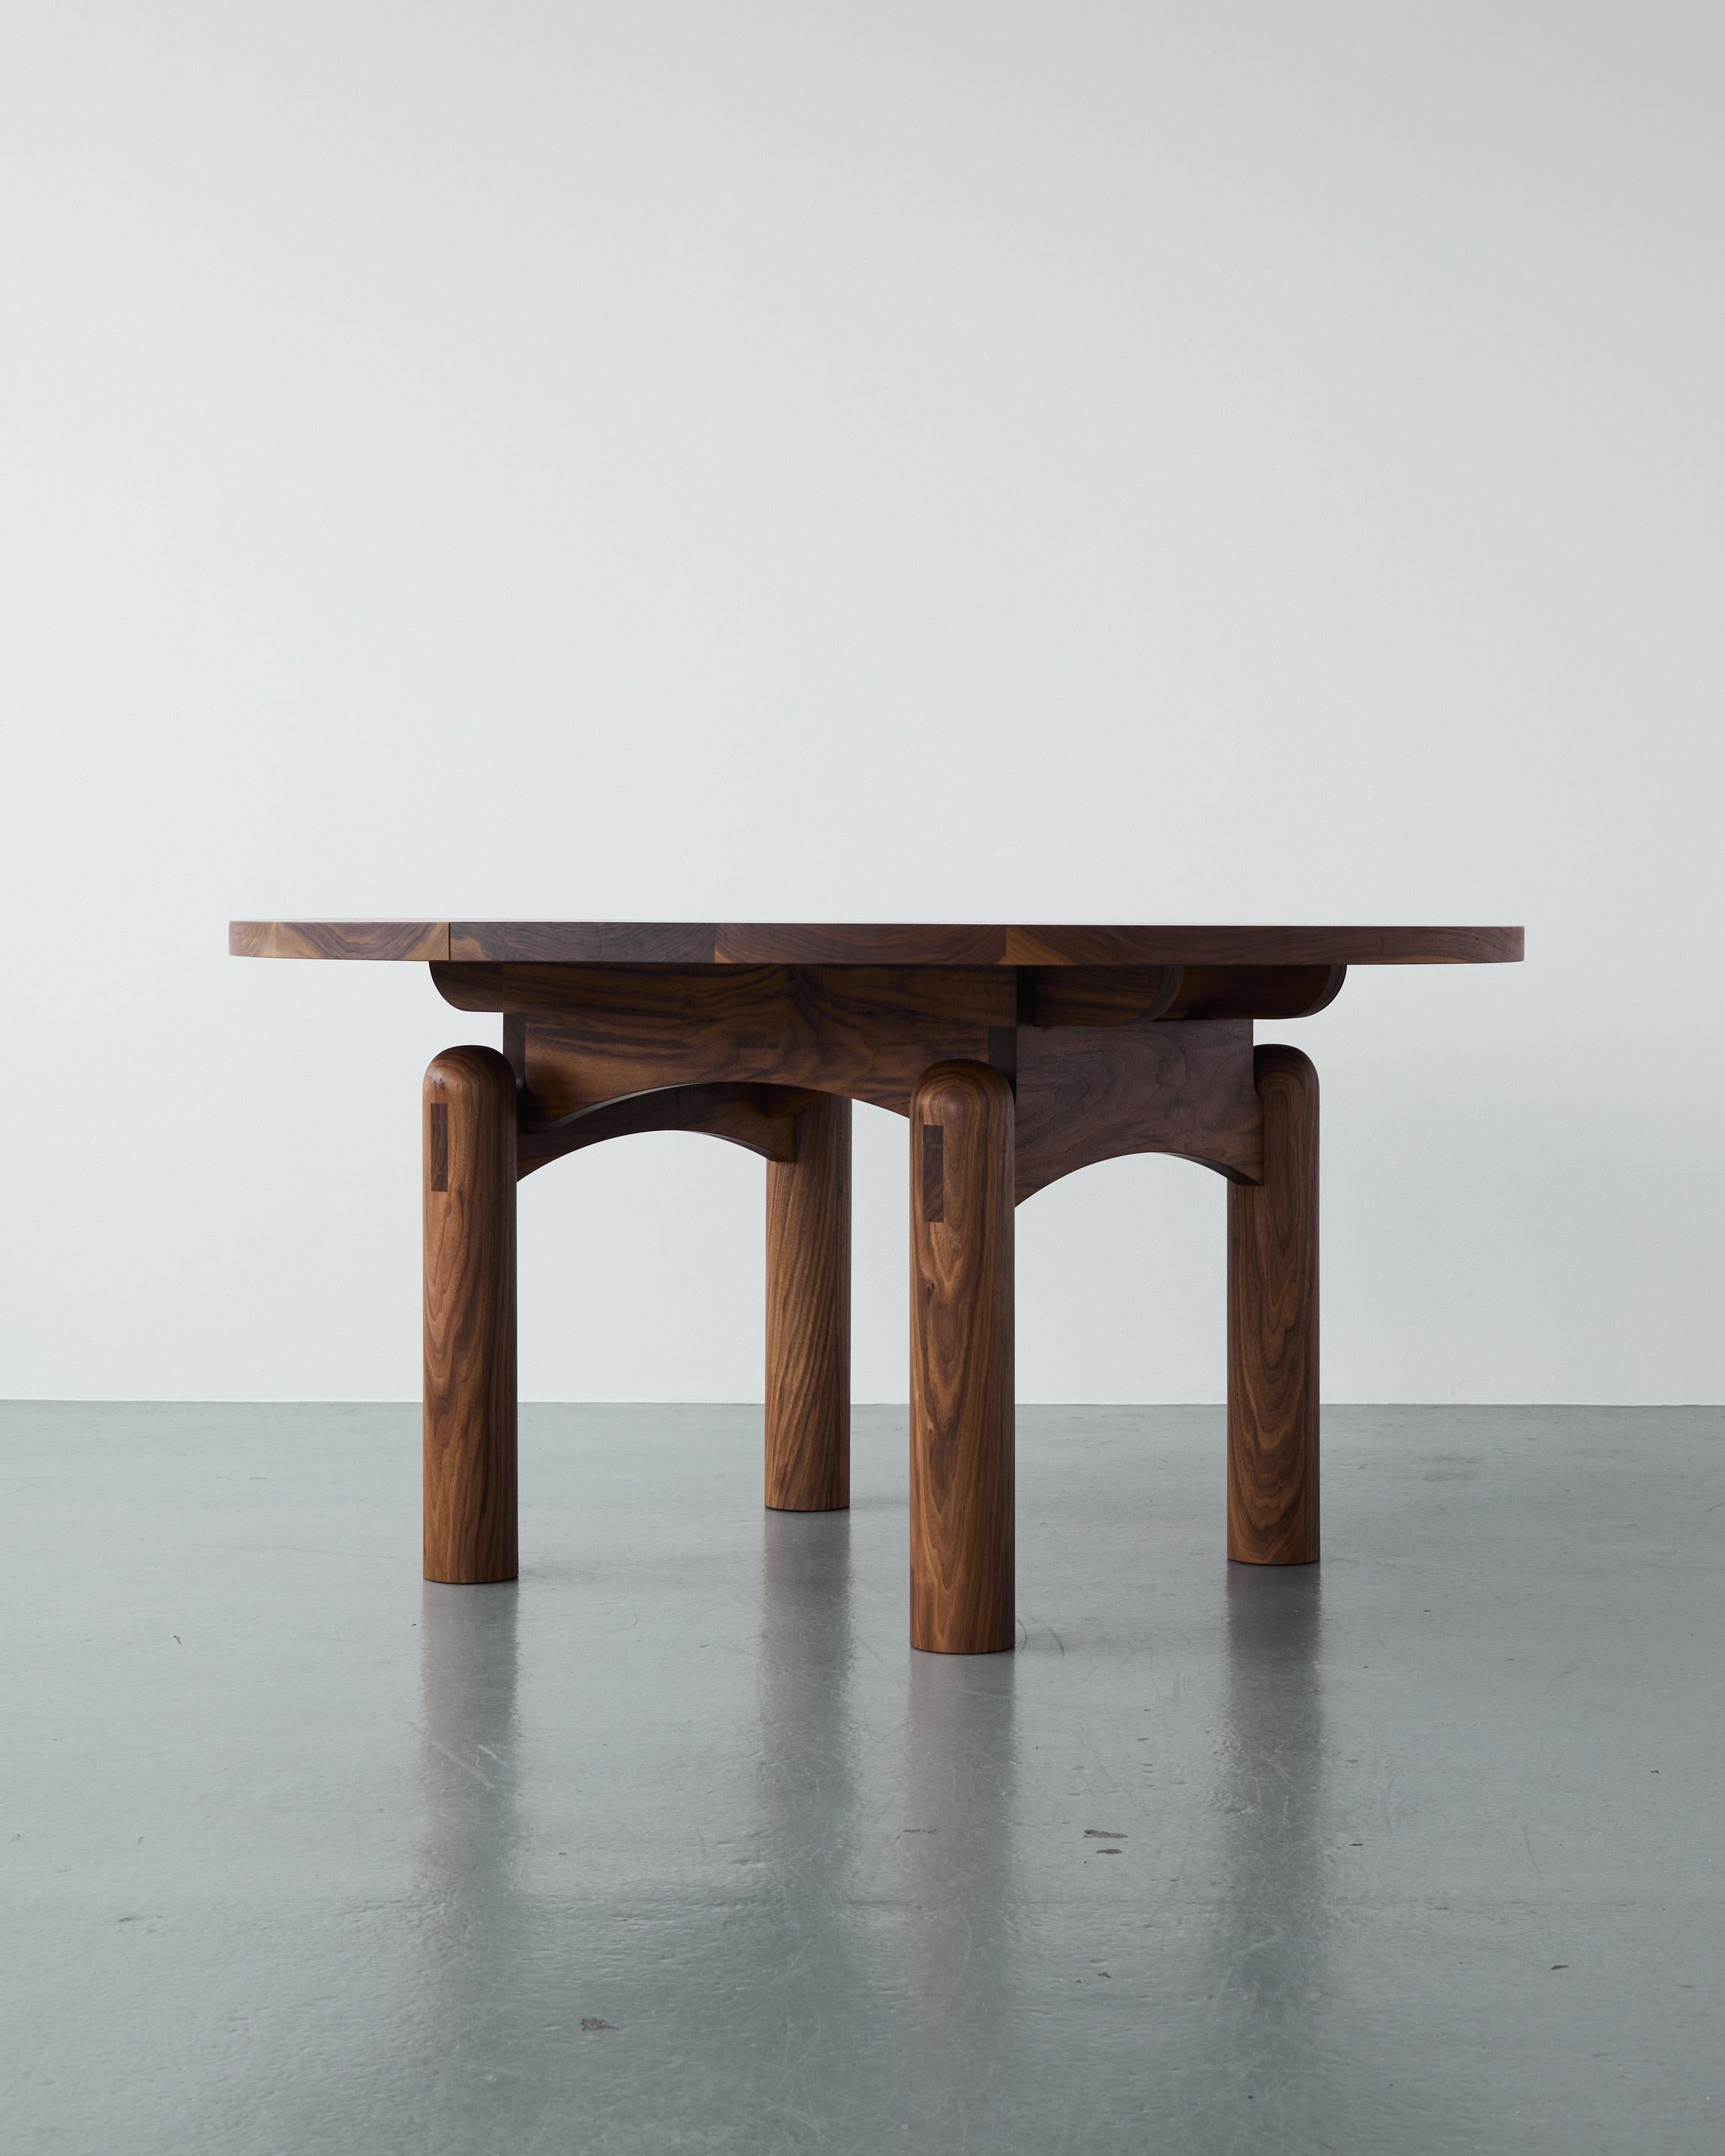 The Nora Dining Table is a sculptural, round table, whose volume and presence ground any dining room. The solid legs are topped with a dome, creating an arched silhouette from any angle and provide a tactile point of interest, which highlights the